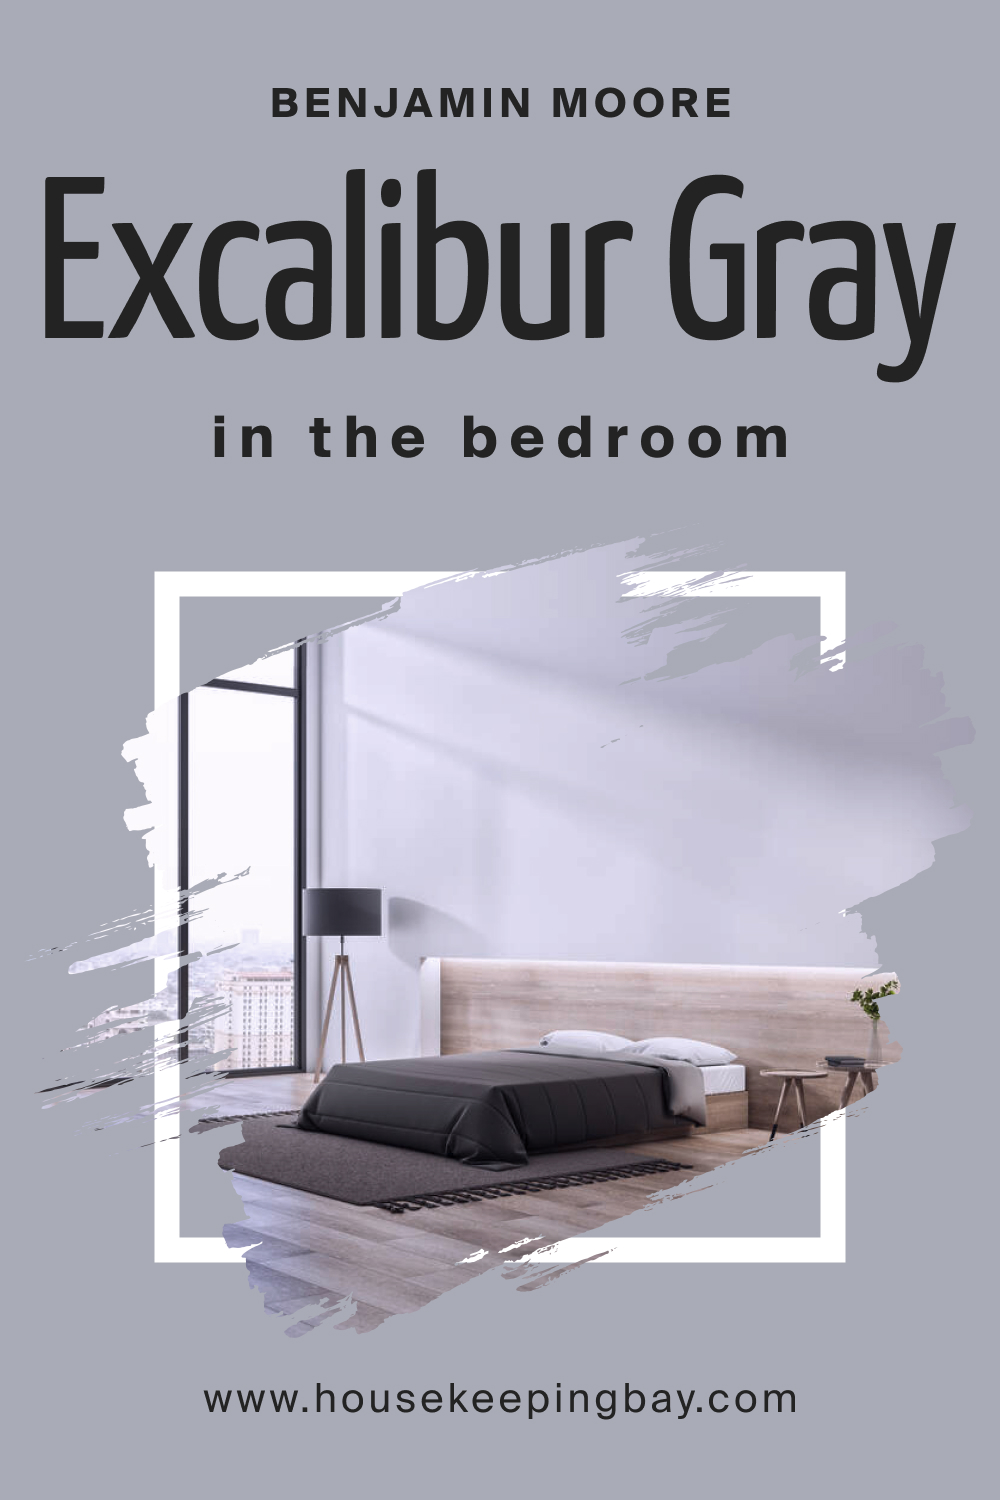 How to Use BM Excalibur Gray 2118-50 in the Bedroom?